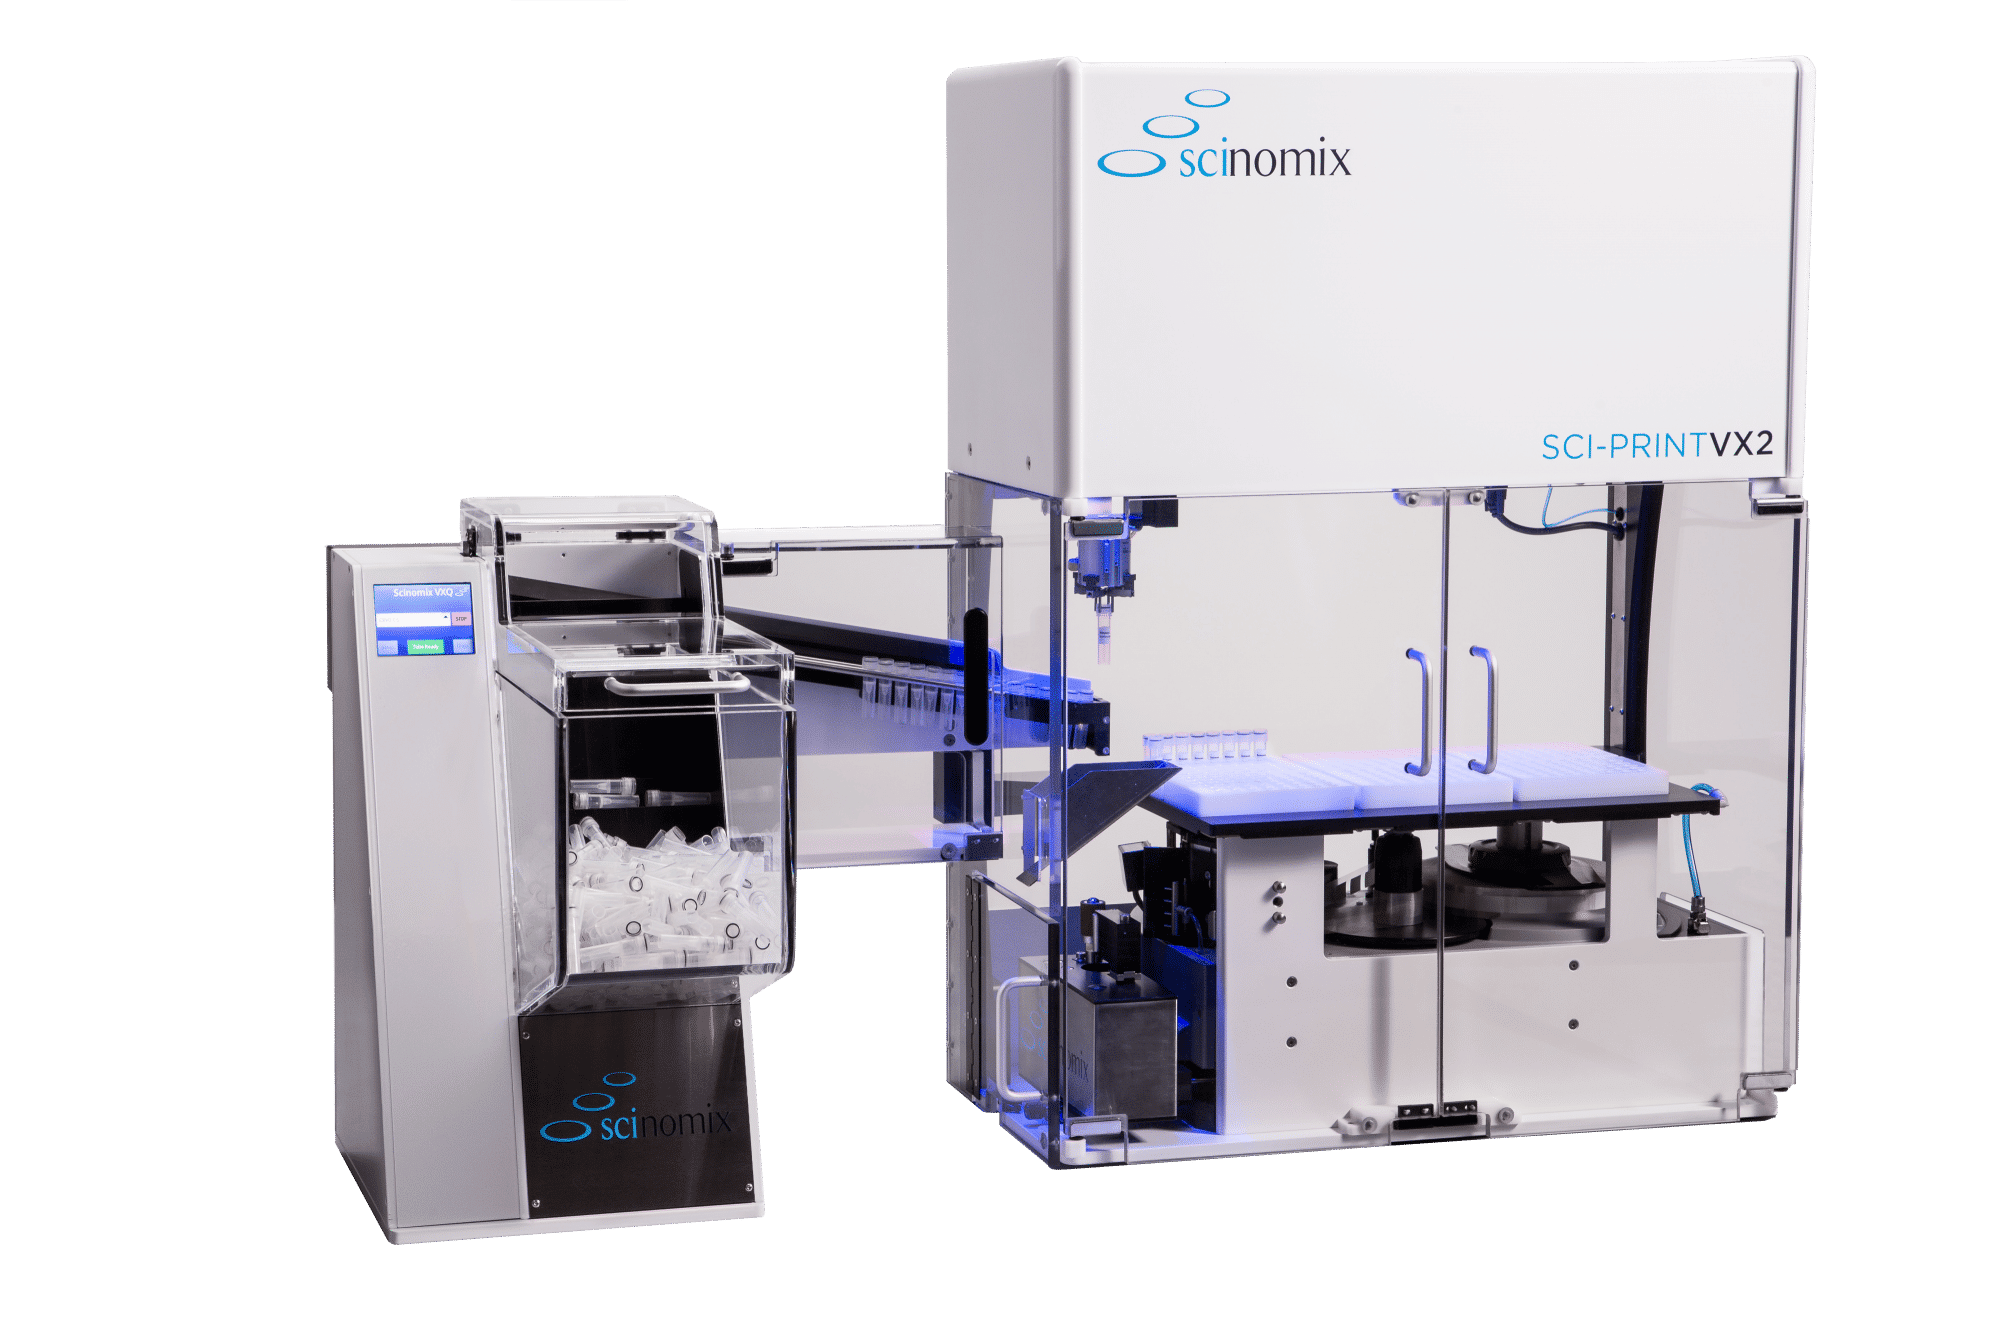 The VXQ bulk tube feeder paired with the Sci-Print VX2 fully automated tube labeler by Scinomix